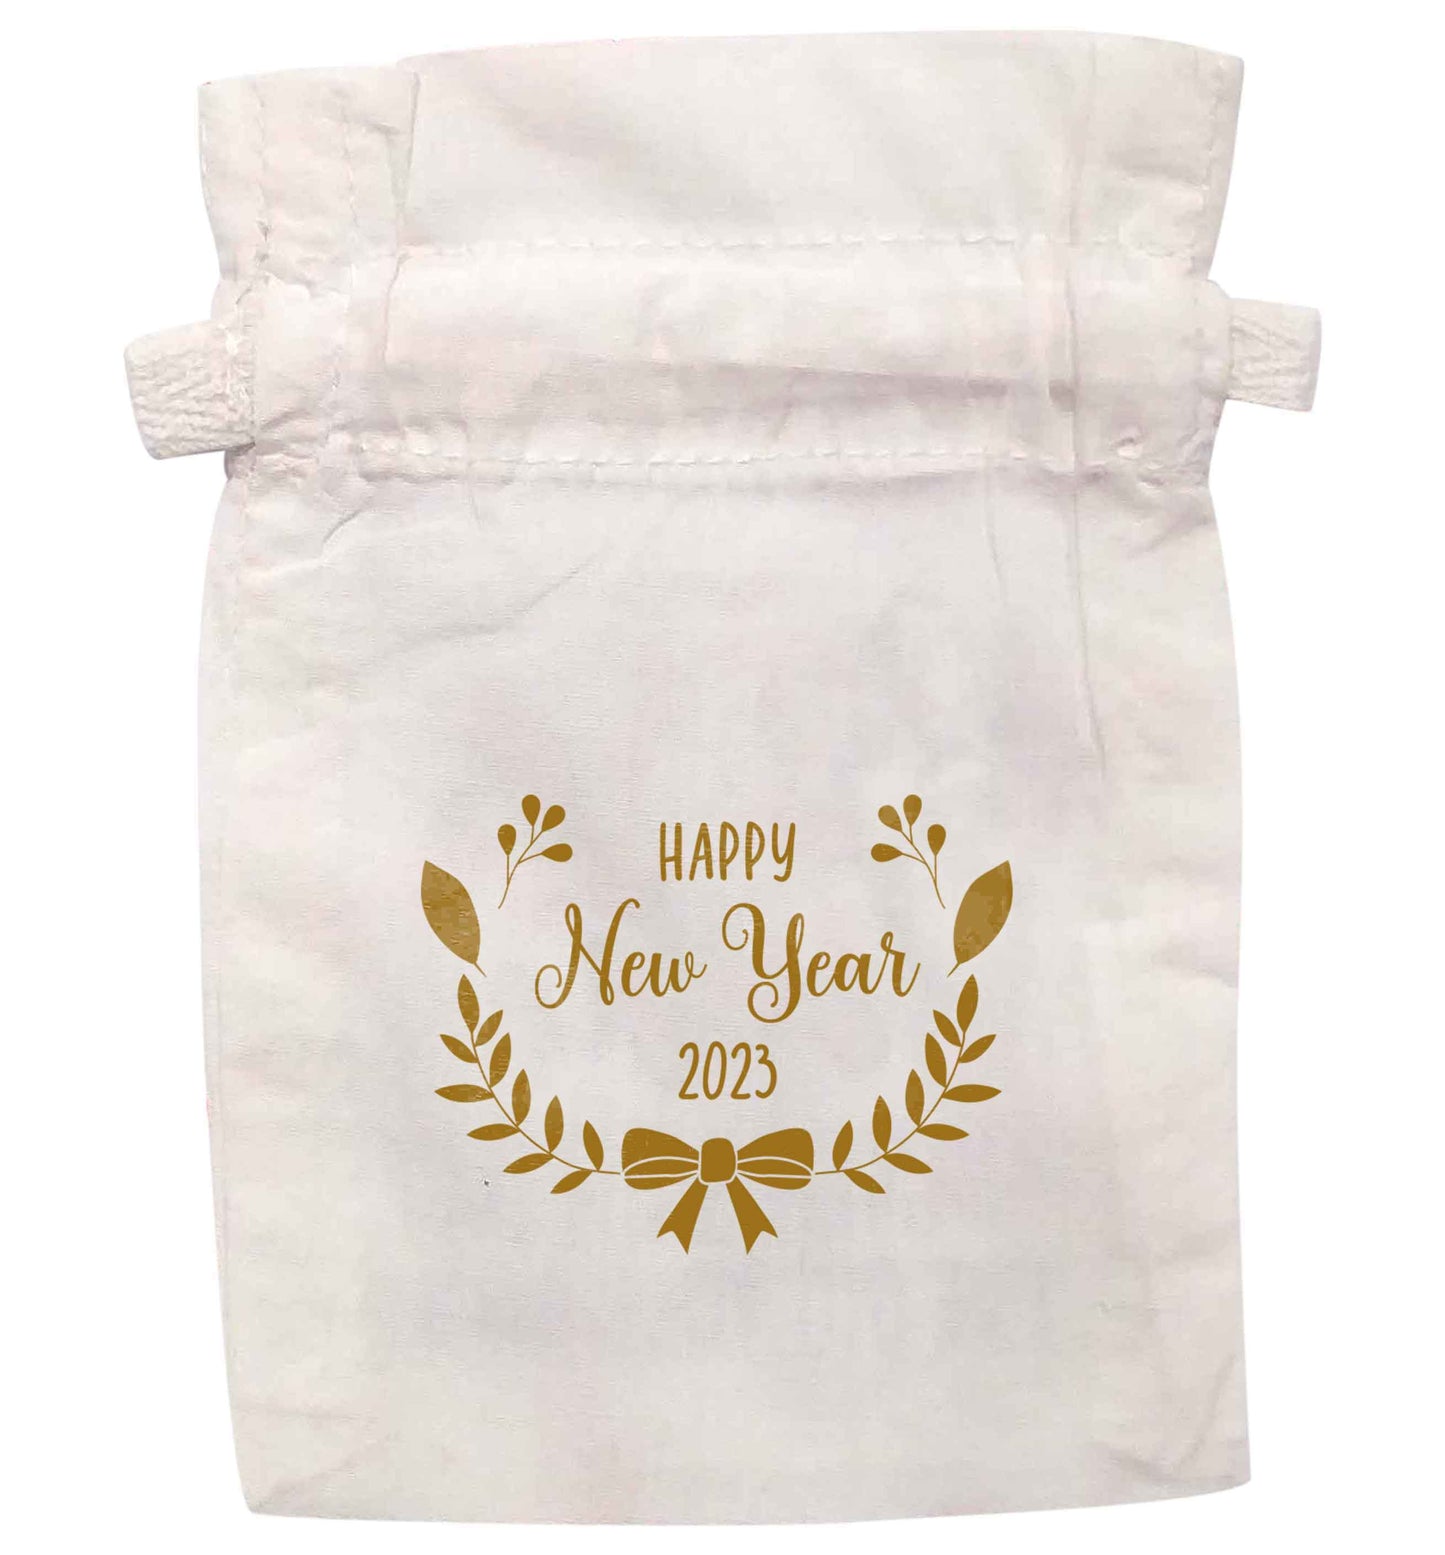 Happy New Year 2023 | XS - L | Pouch / Drawstring bag / Sack | Organic Cotton | Bulk discounts available!